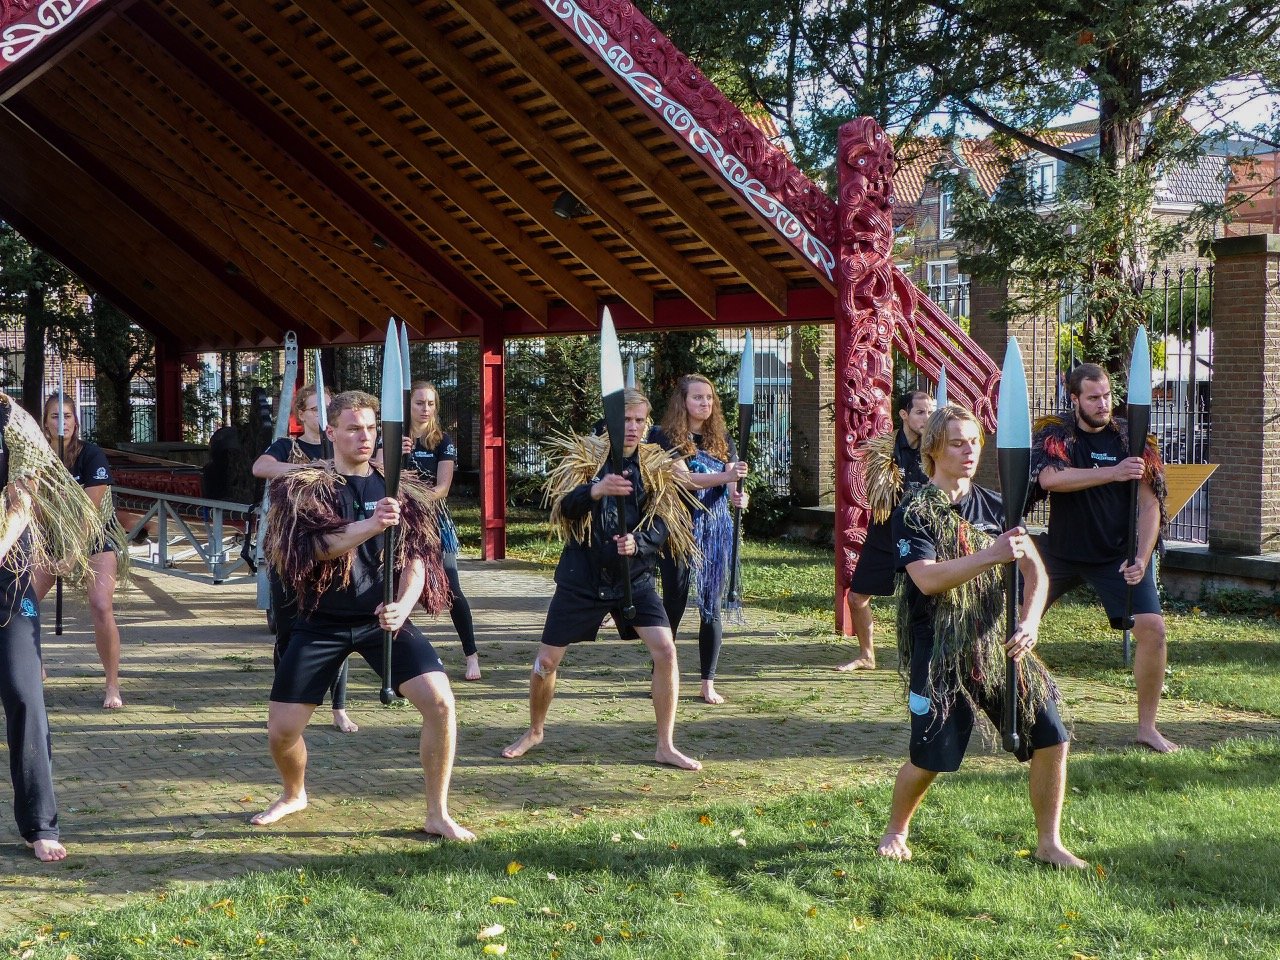  Production still from ‘Going Native’ (2017/2022) by Yuki Kihara.   Featuring  ‘ Te hono ki Aotearoa: The Link To New Zealand’ student rowing club members performing the haka (Māori ceremonial war dance) in Leiden, The Netherlands. Photo by Wonu Veys